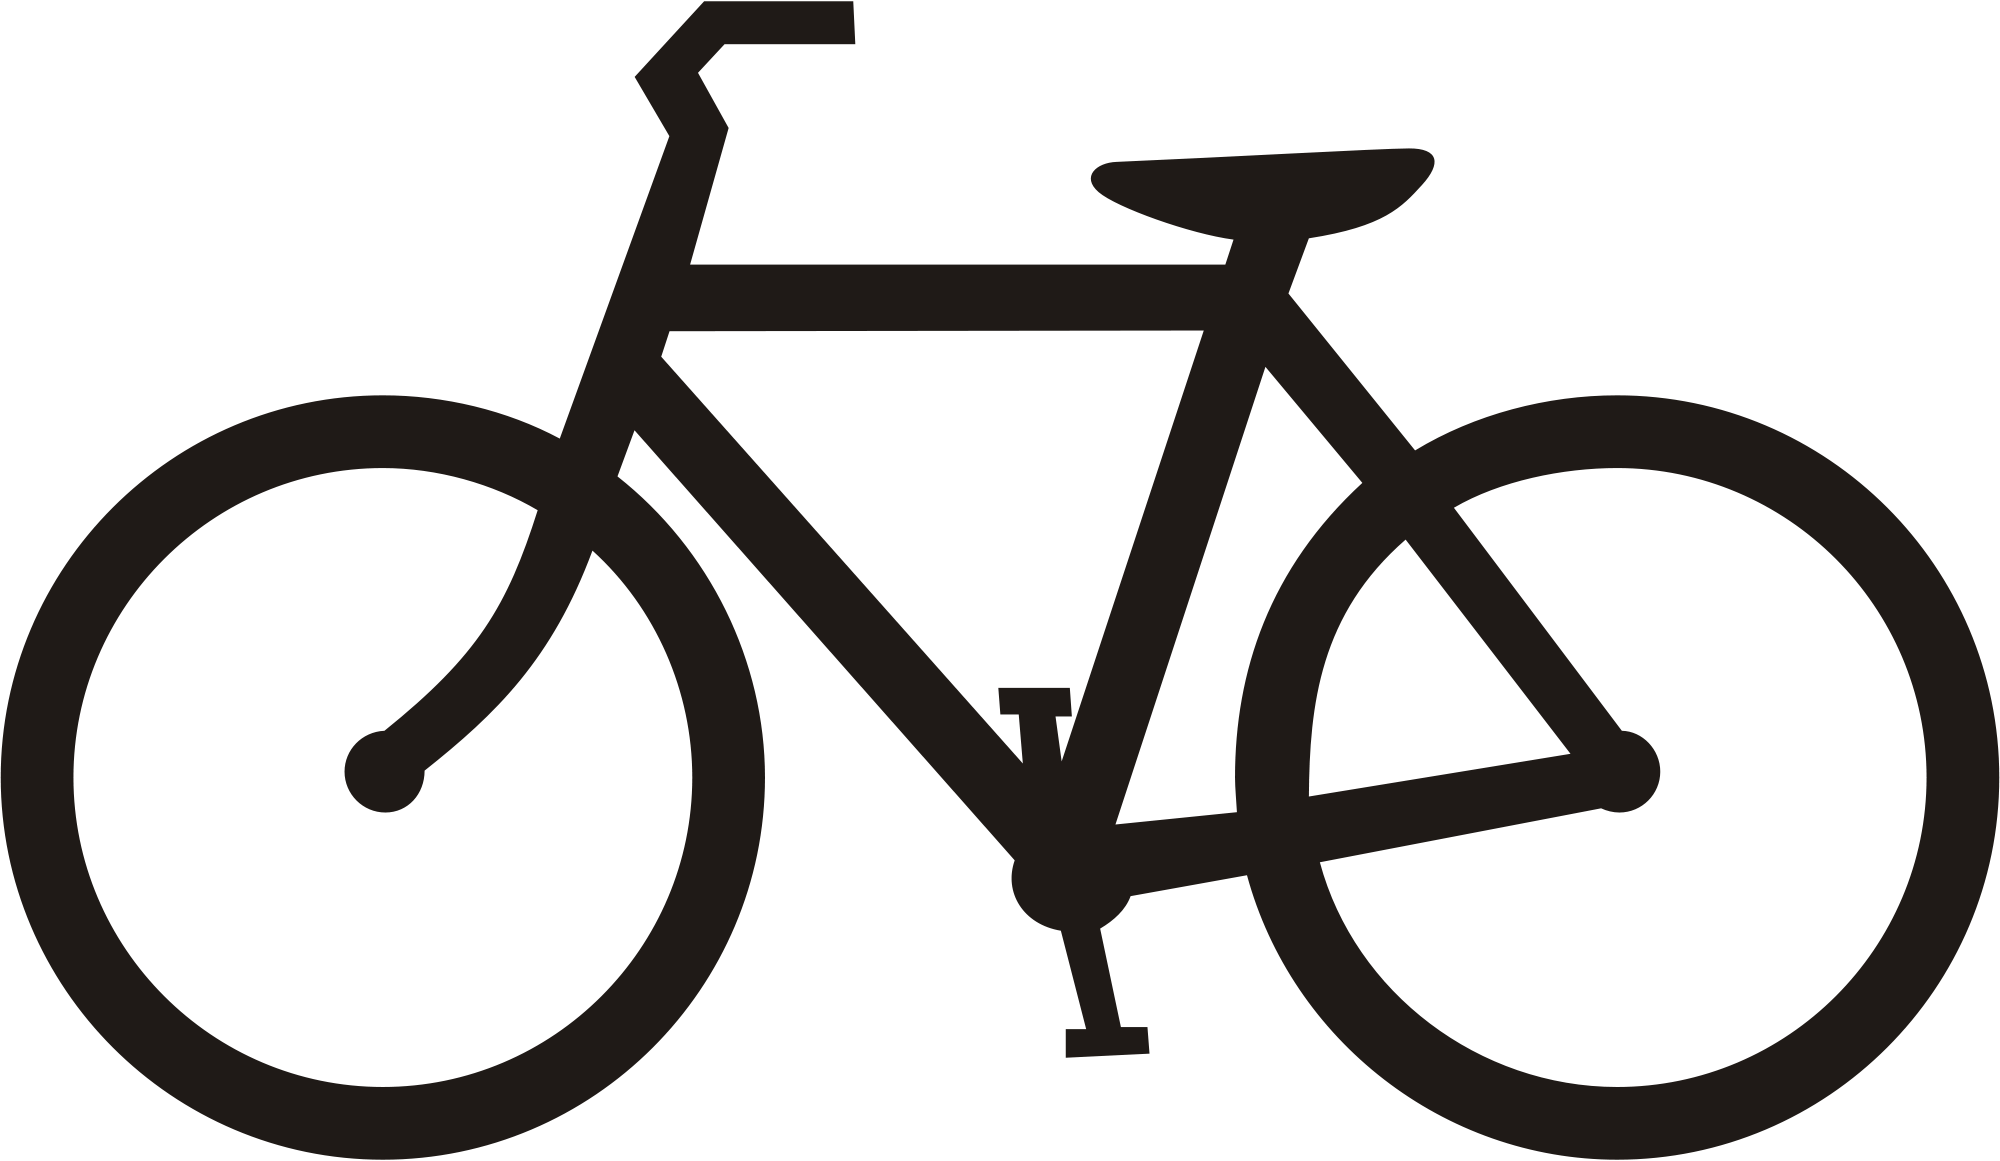 Bicycle signs incep imagine. Biking clipart symbol